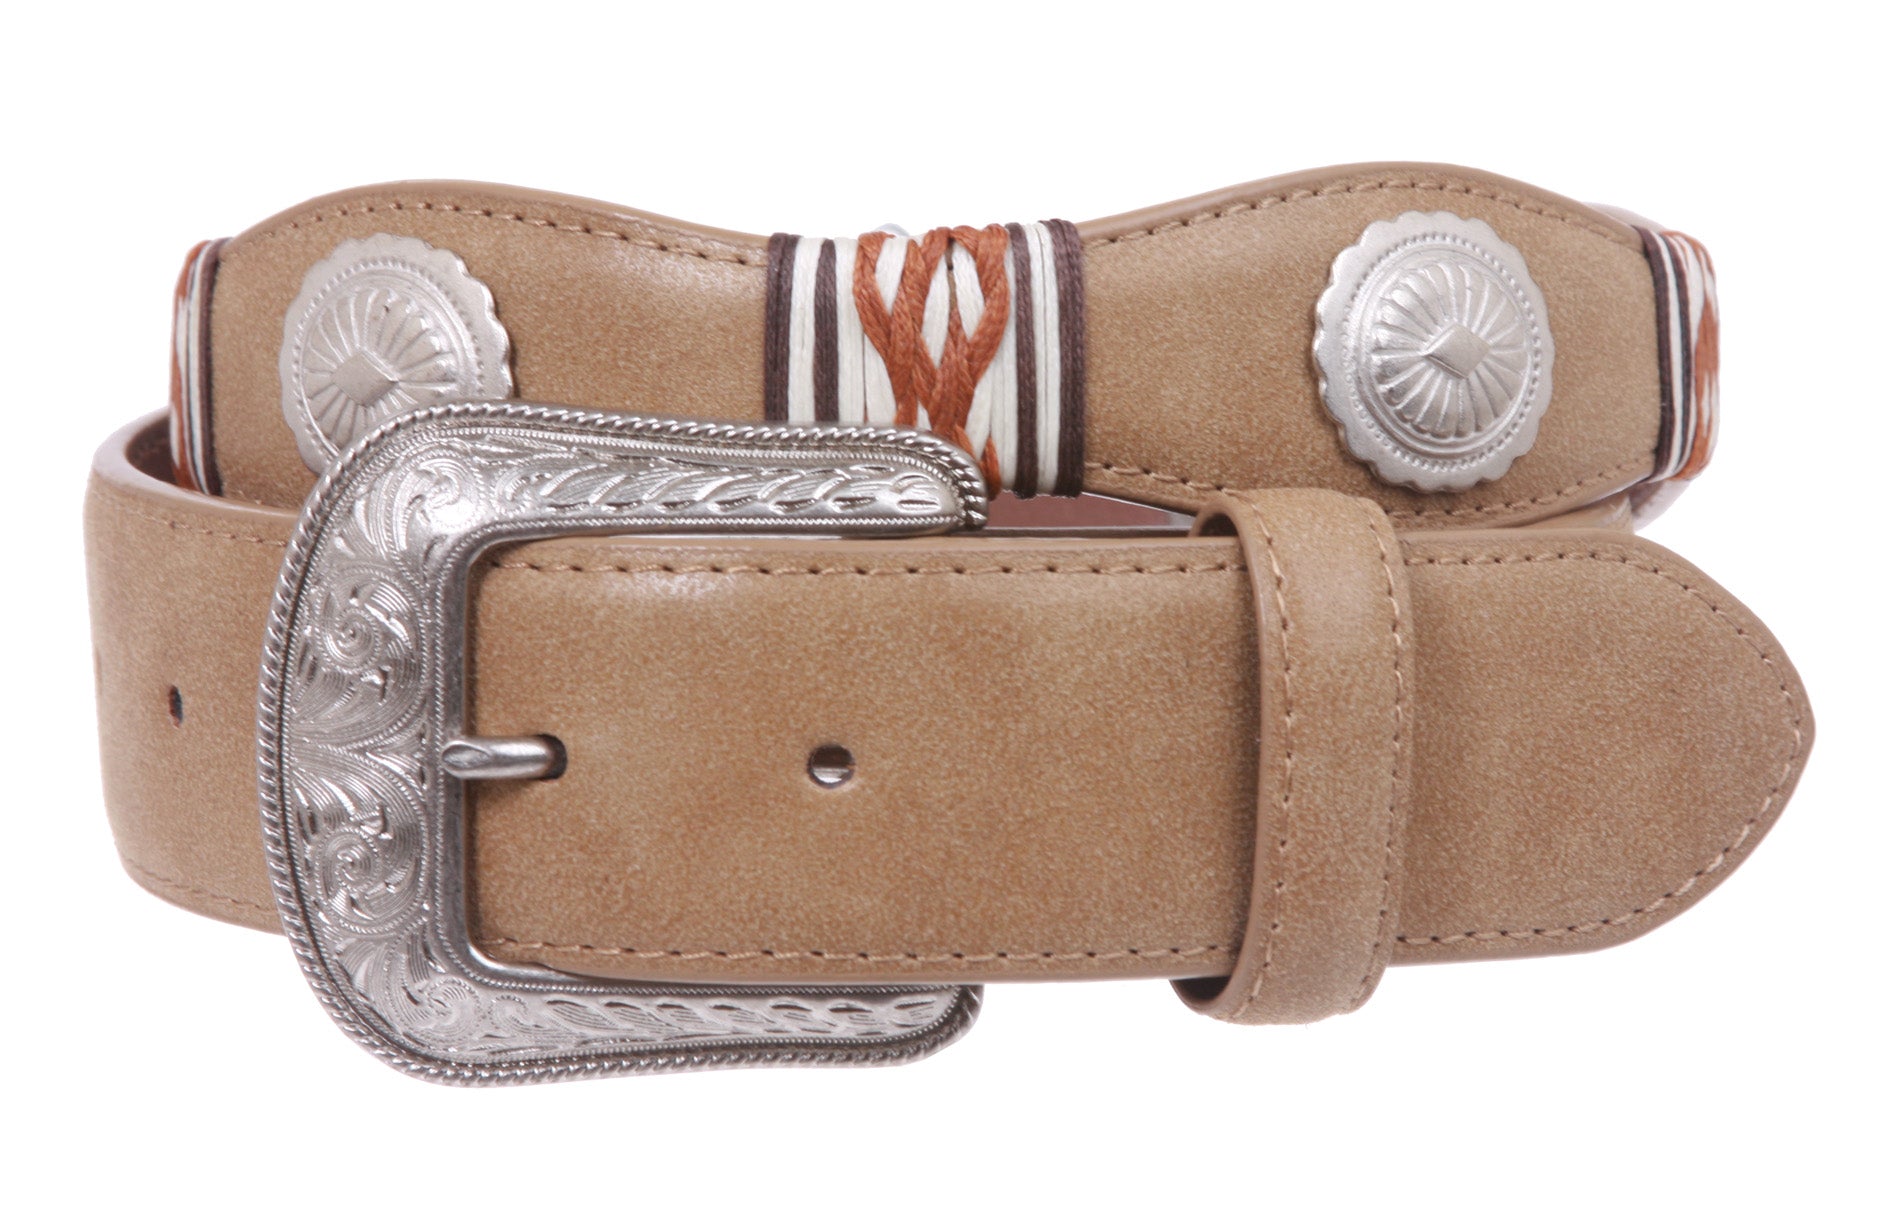 1 1/2'' Snap On Western Leather Casual Belt